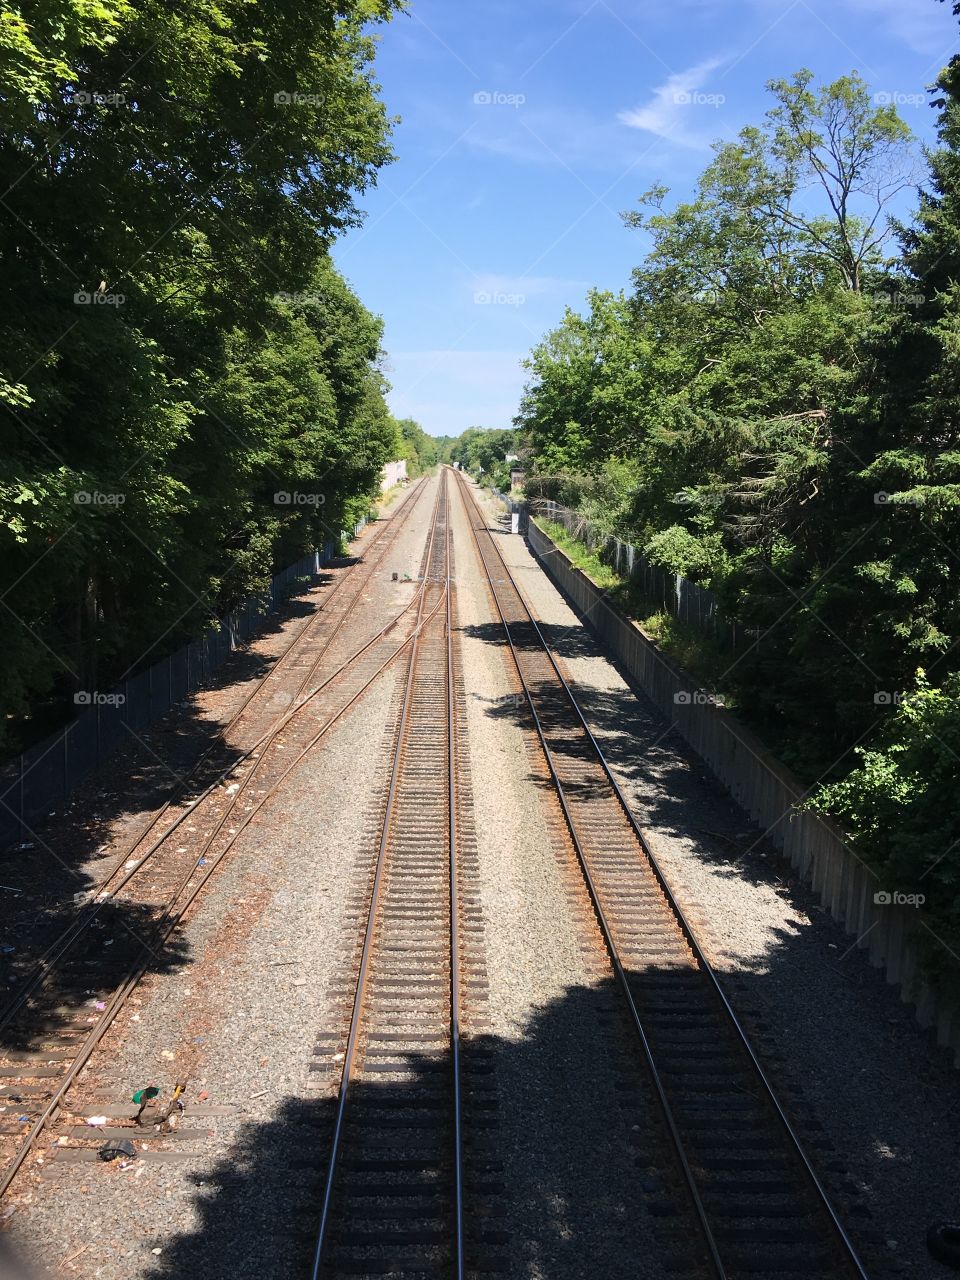 Three railroad tracks leading to an endless point!